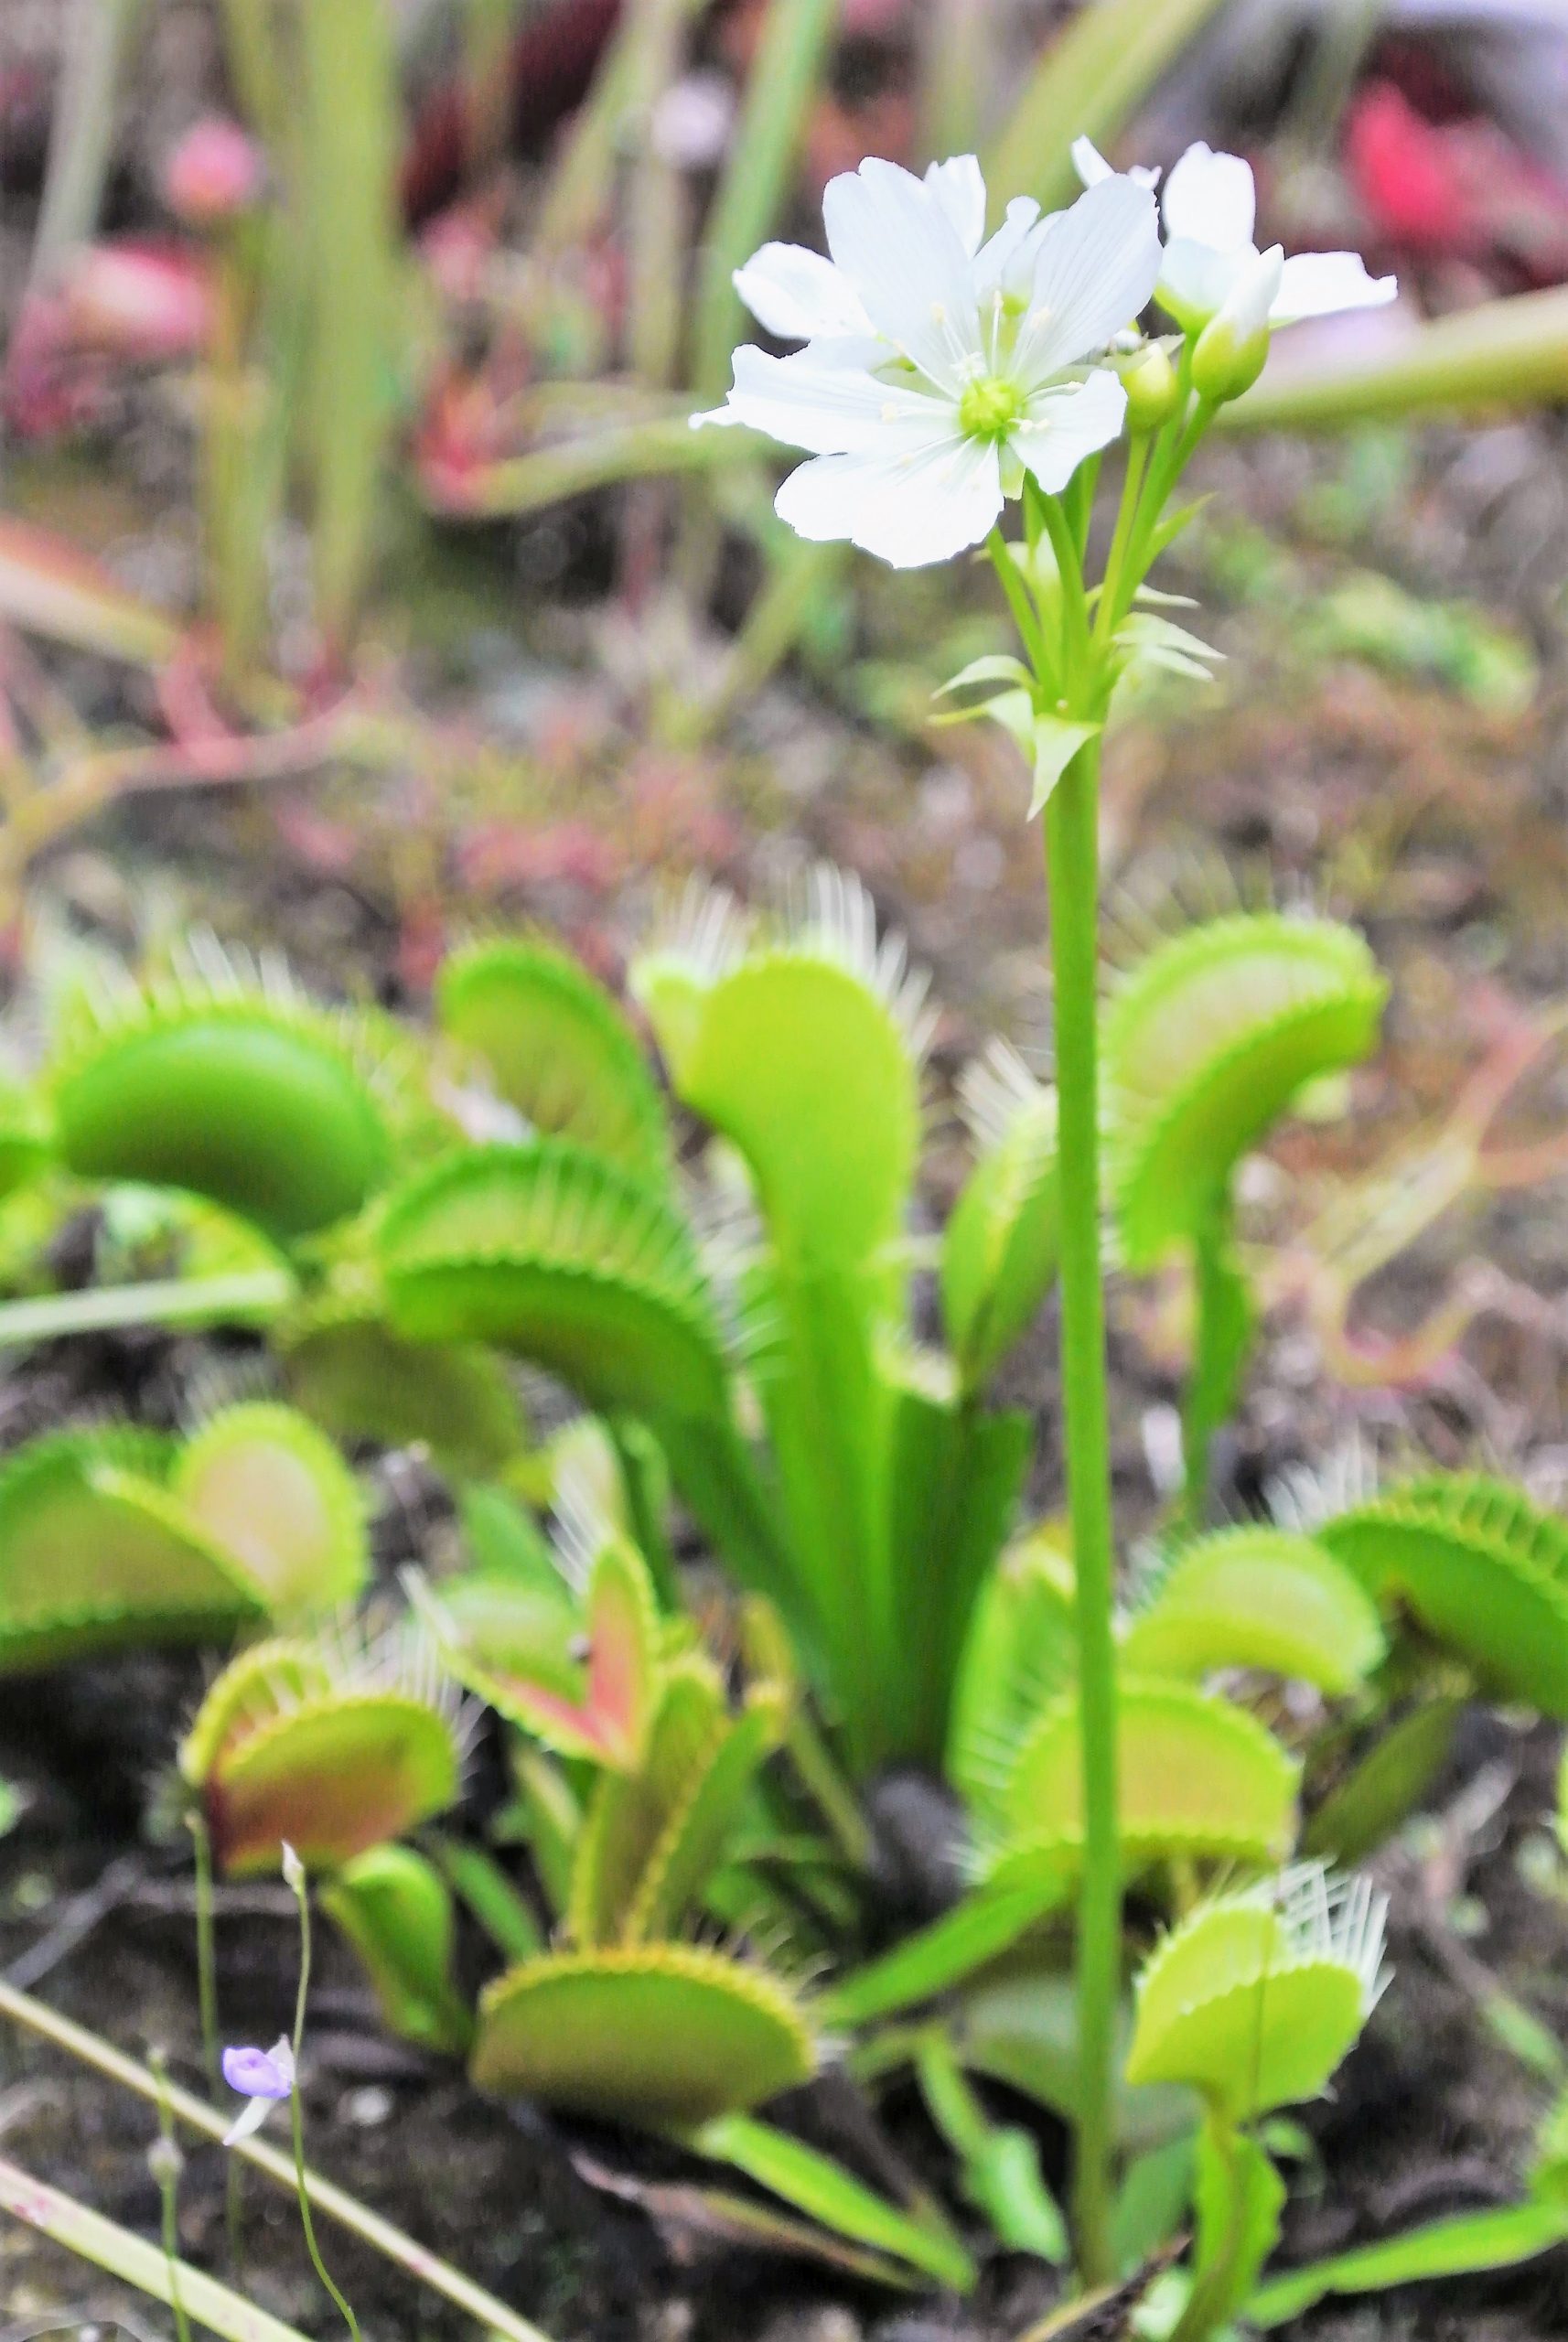 A cluster of white flowers are seen about the open leaves of a Venus flytrap